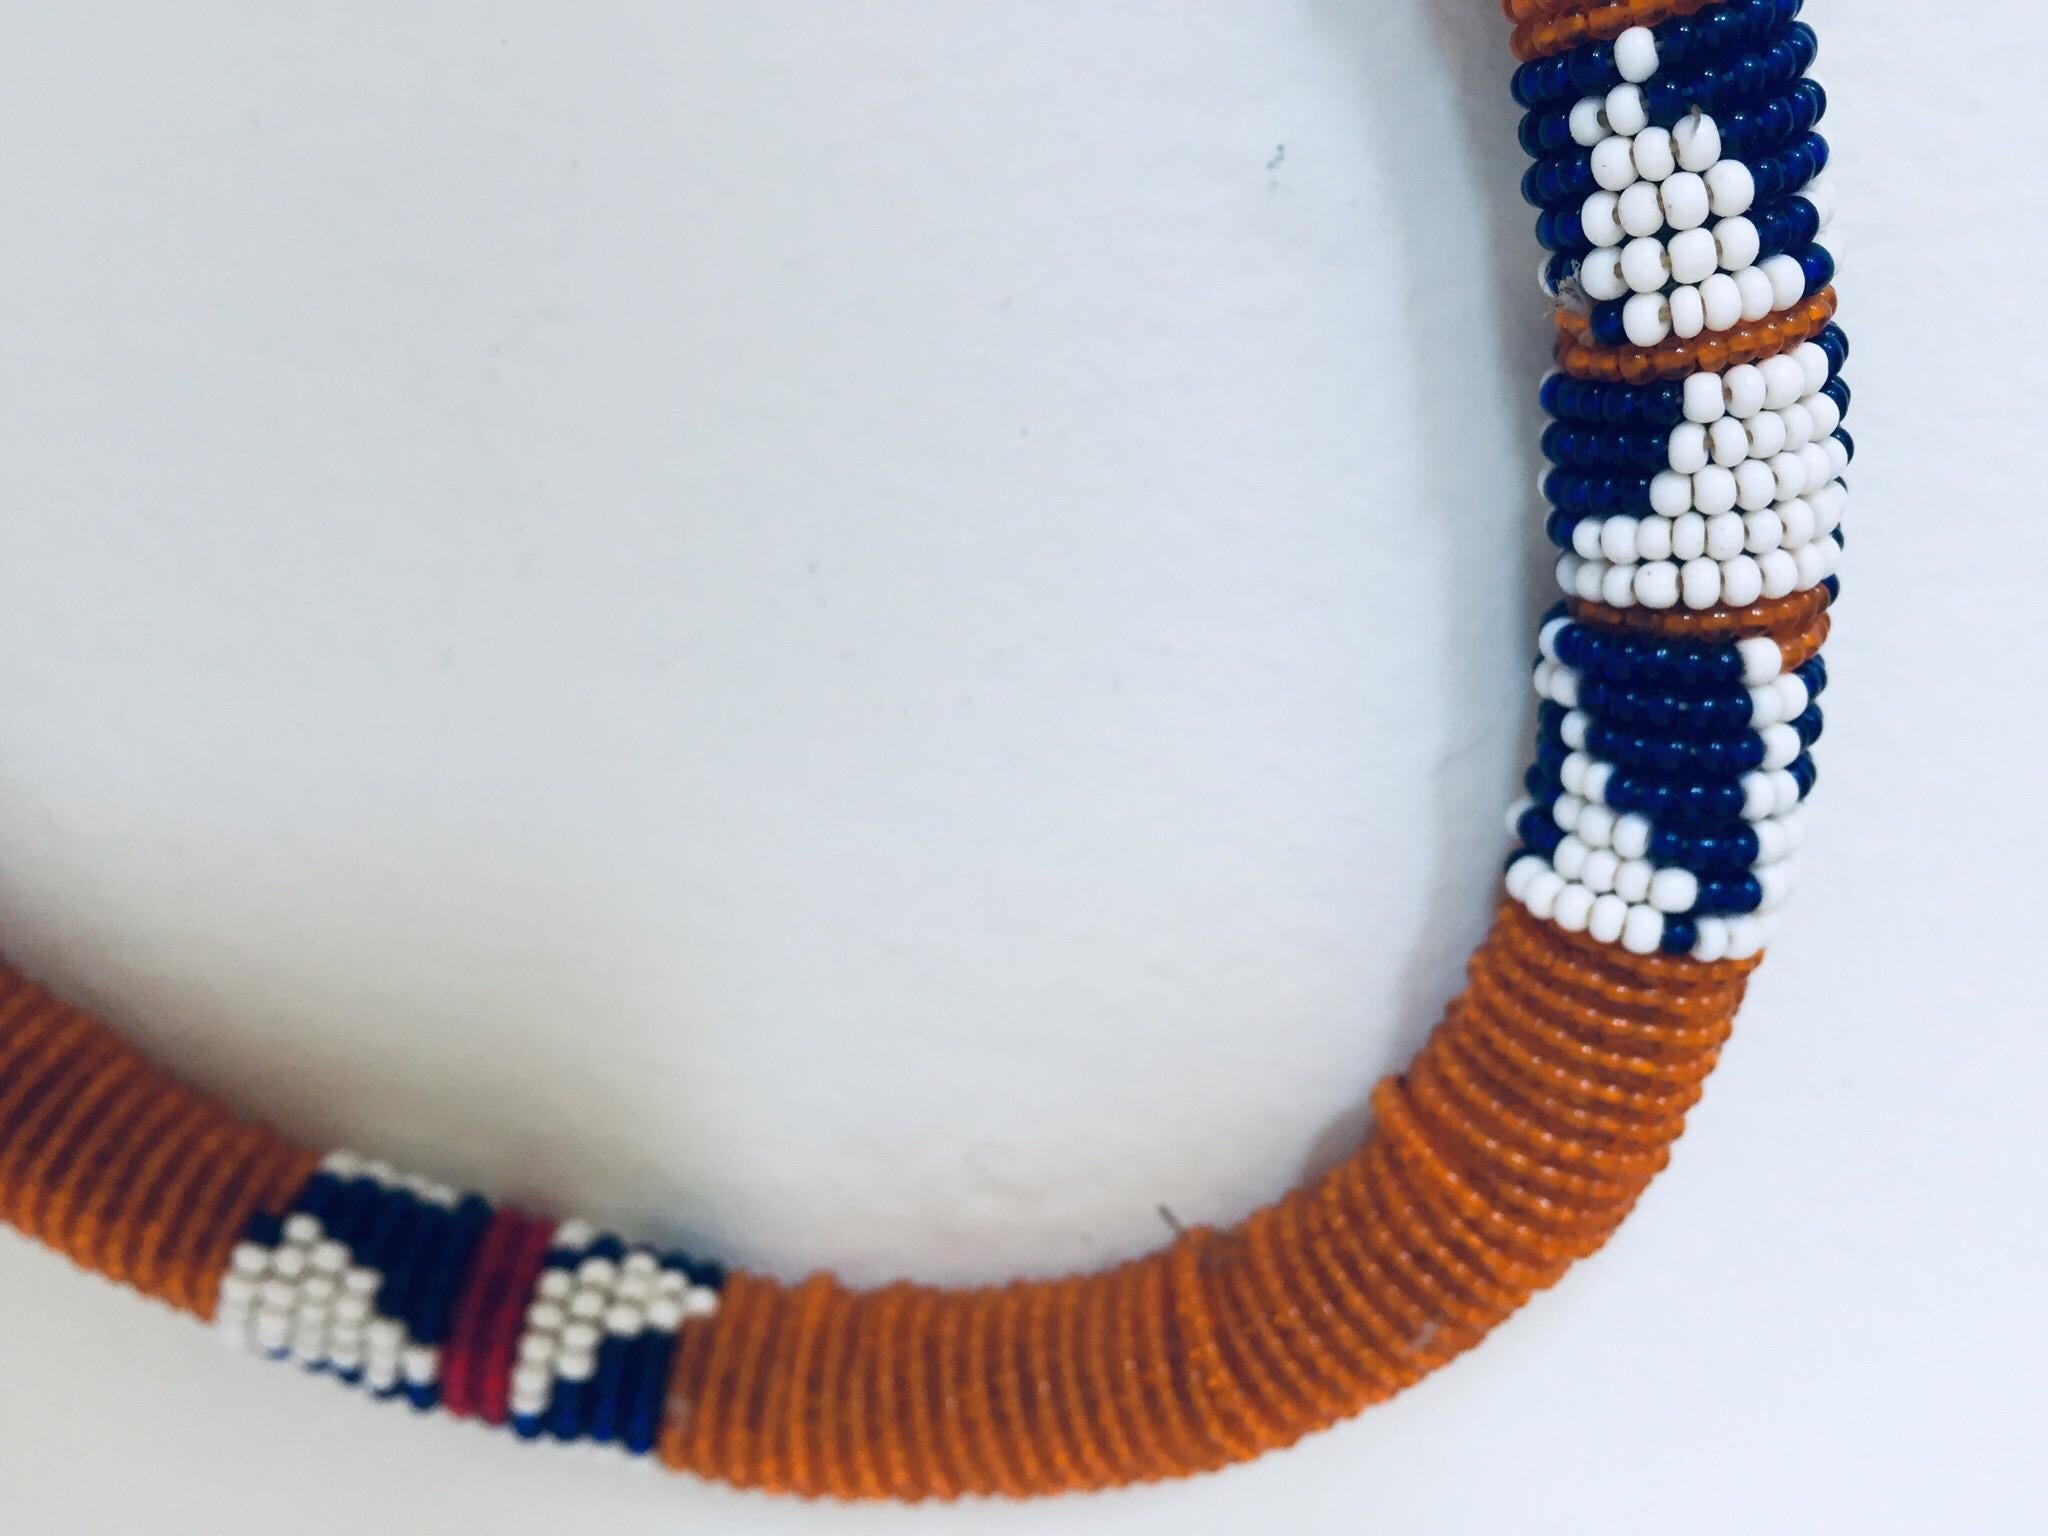 Tribal Vintage African Urembo Beaded Necklace Choker by the Maasai Tribe Kenya